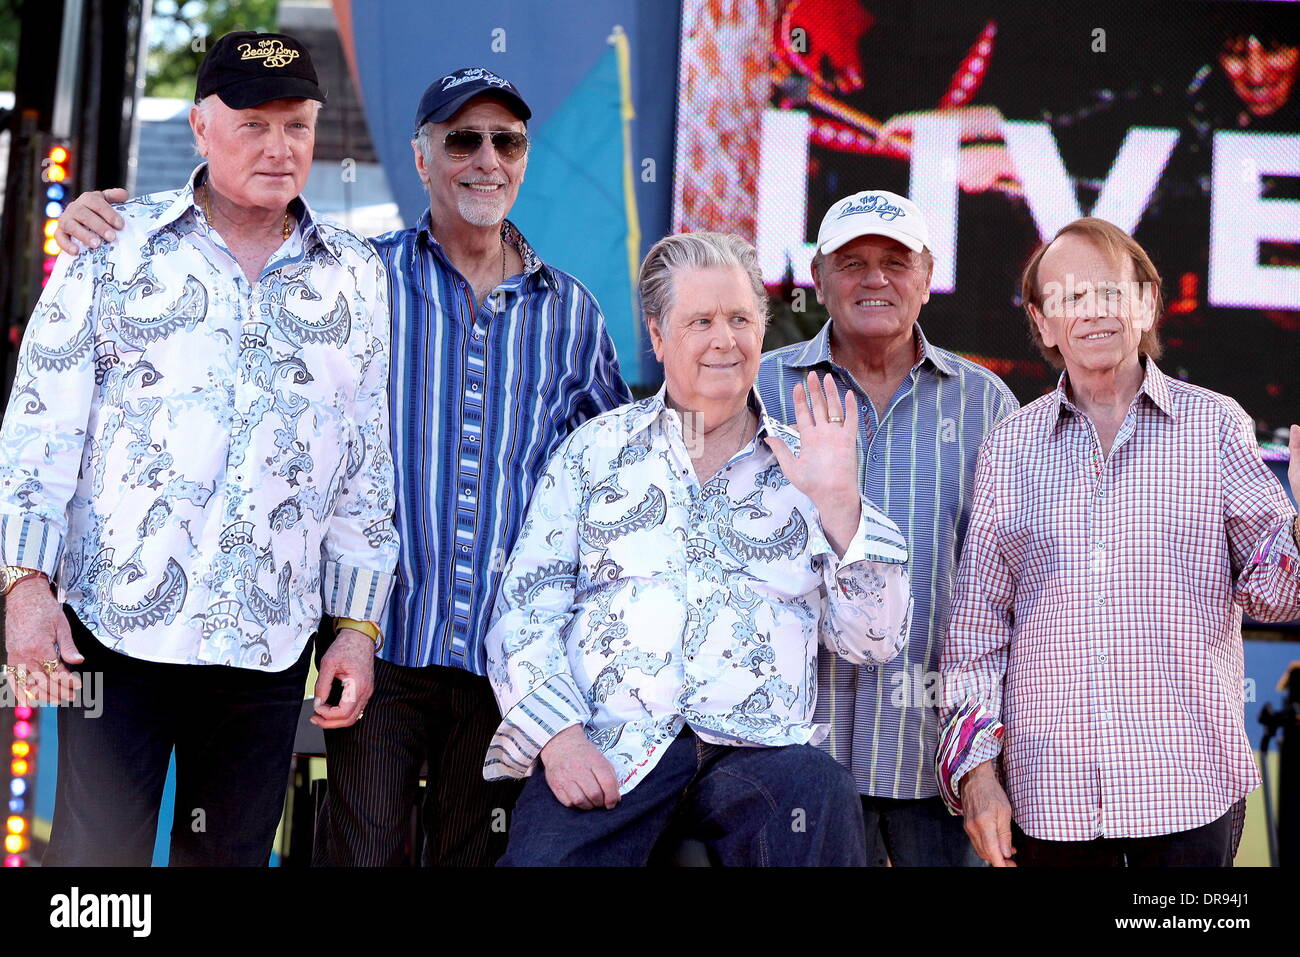 Mike Love, David Marks, Brian Wilson, Bruce Arthur Johnston and Al Jardine The Beach Boys perform live in Central Park as part of Good Morning America's Summer Concert Series  Where: New York City, NY, United States When: 15 Jun 2012 Stock Photo